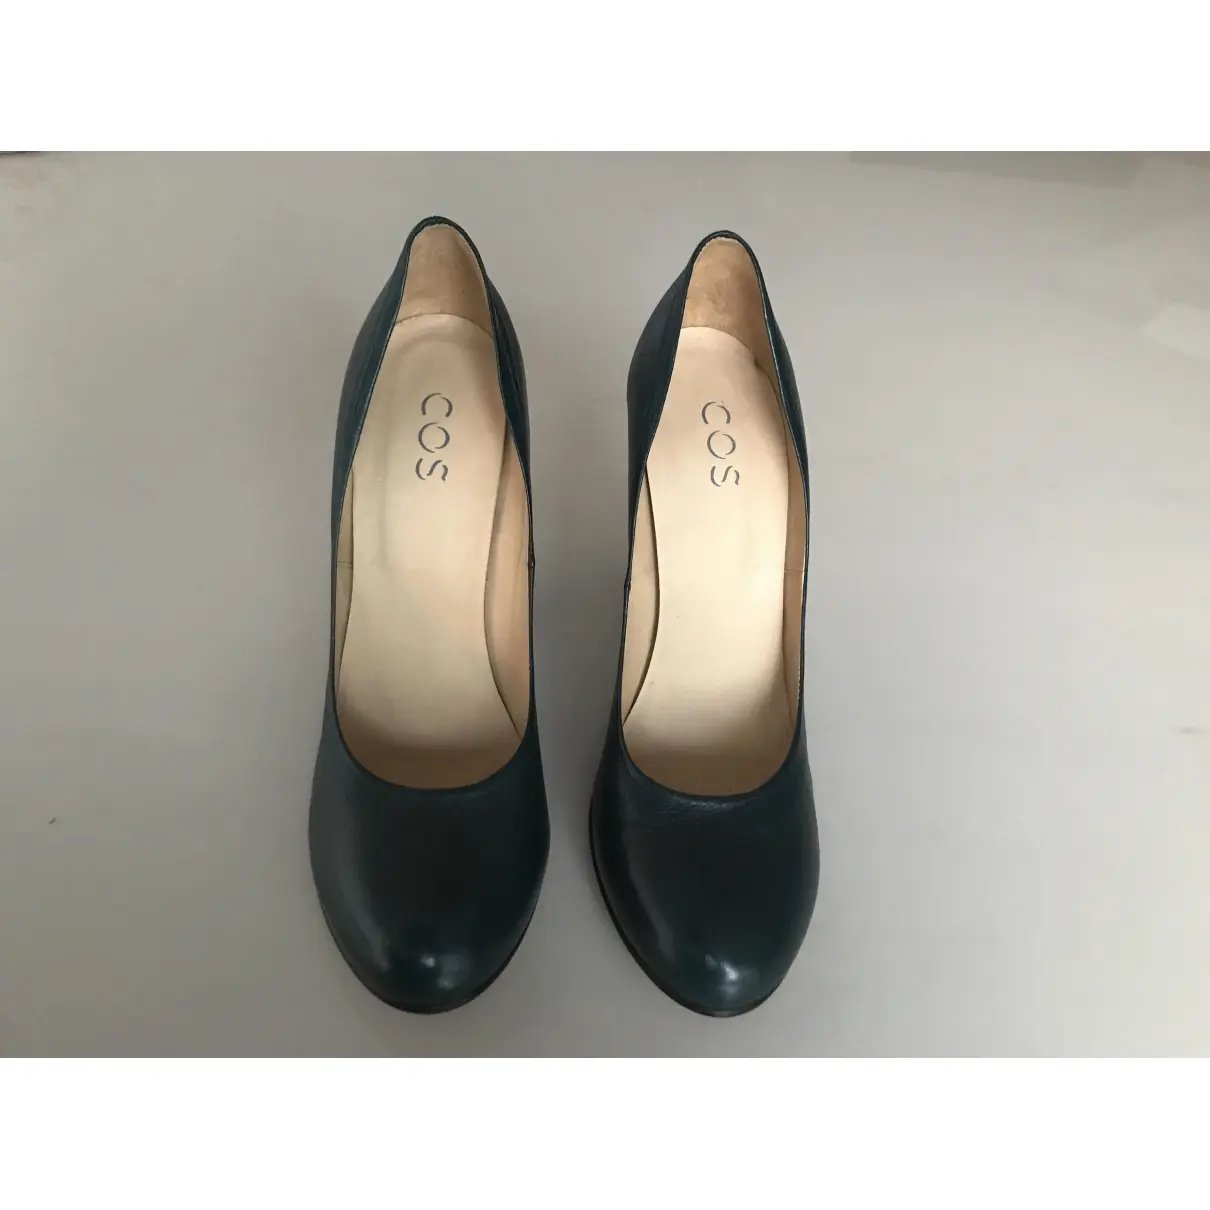 Cos Leather heels for sale